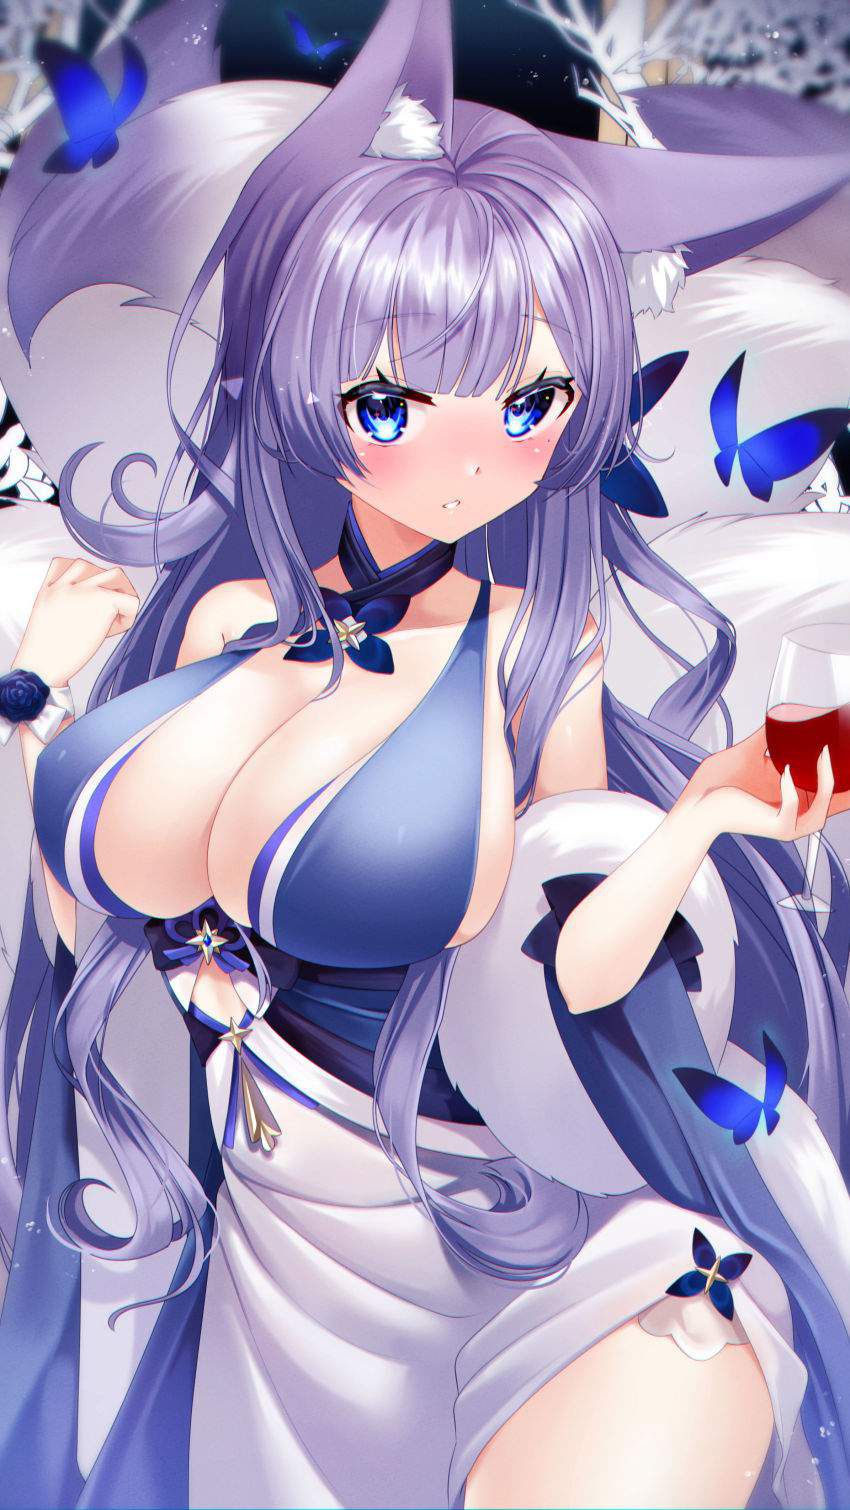 Azur Lane has collected images because it is erotic 19